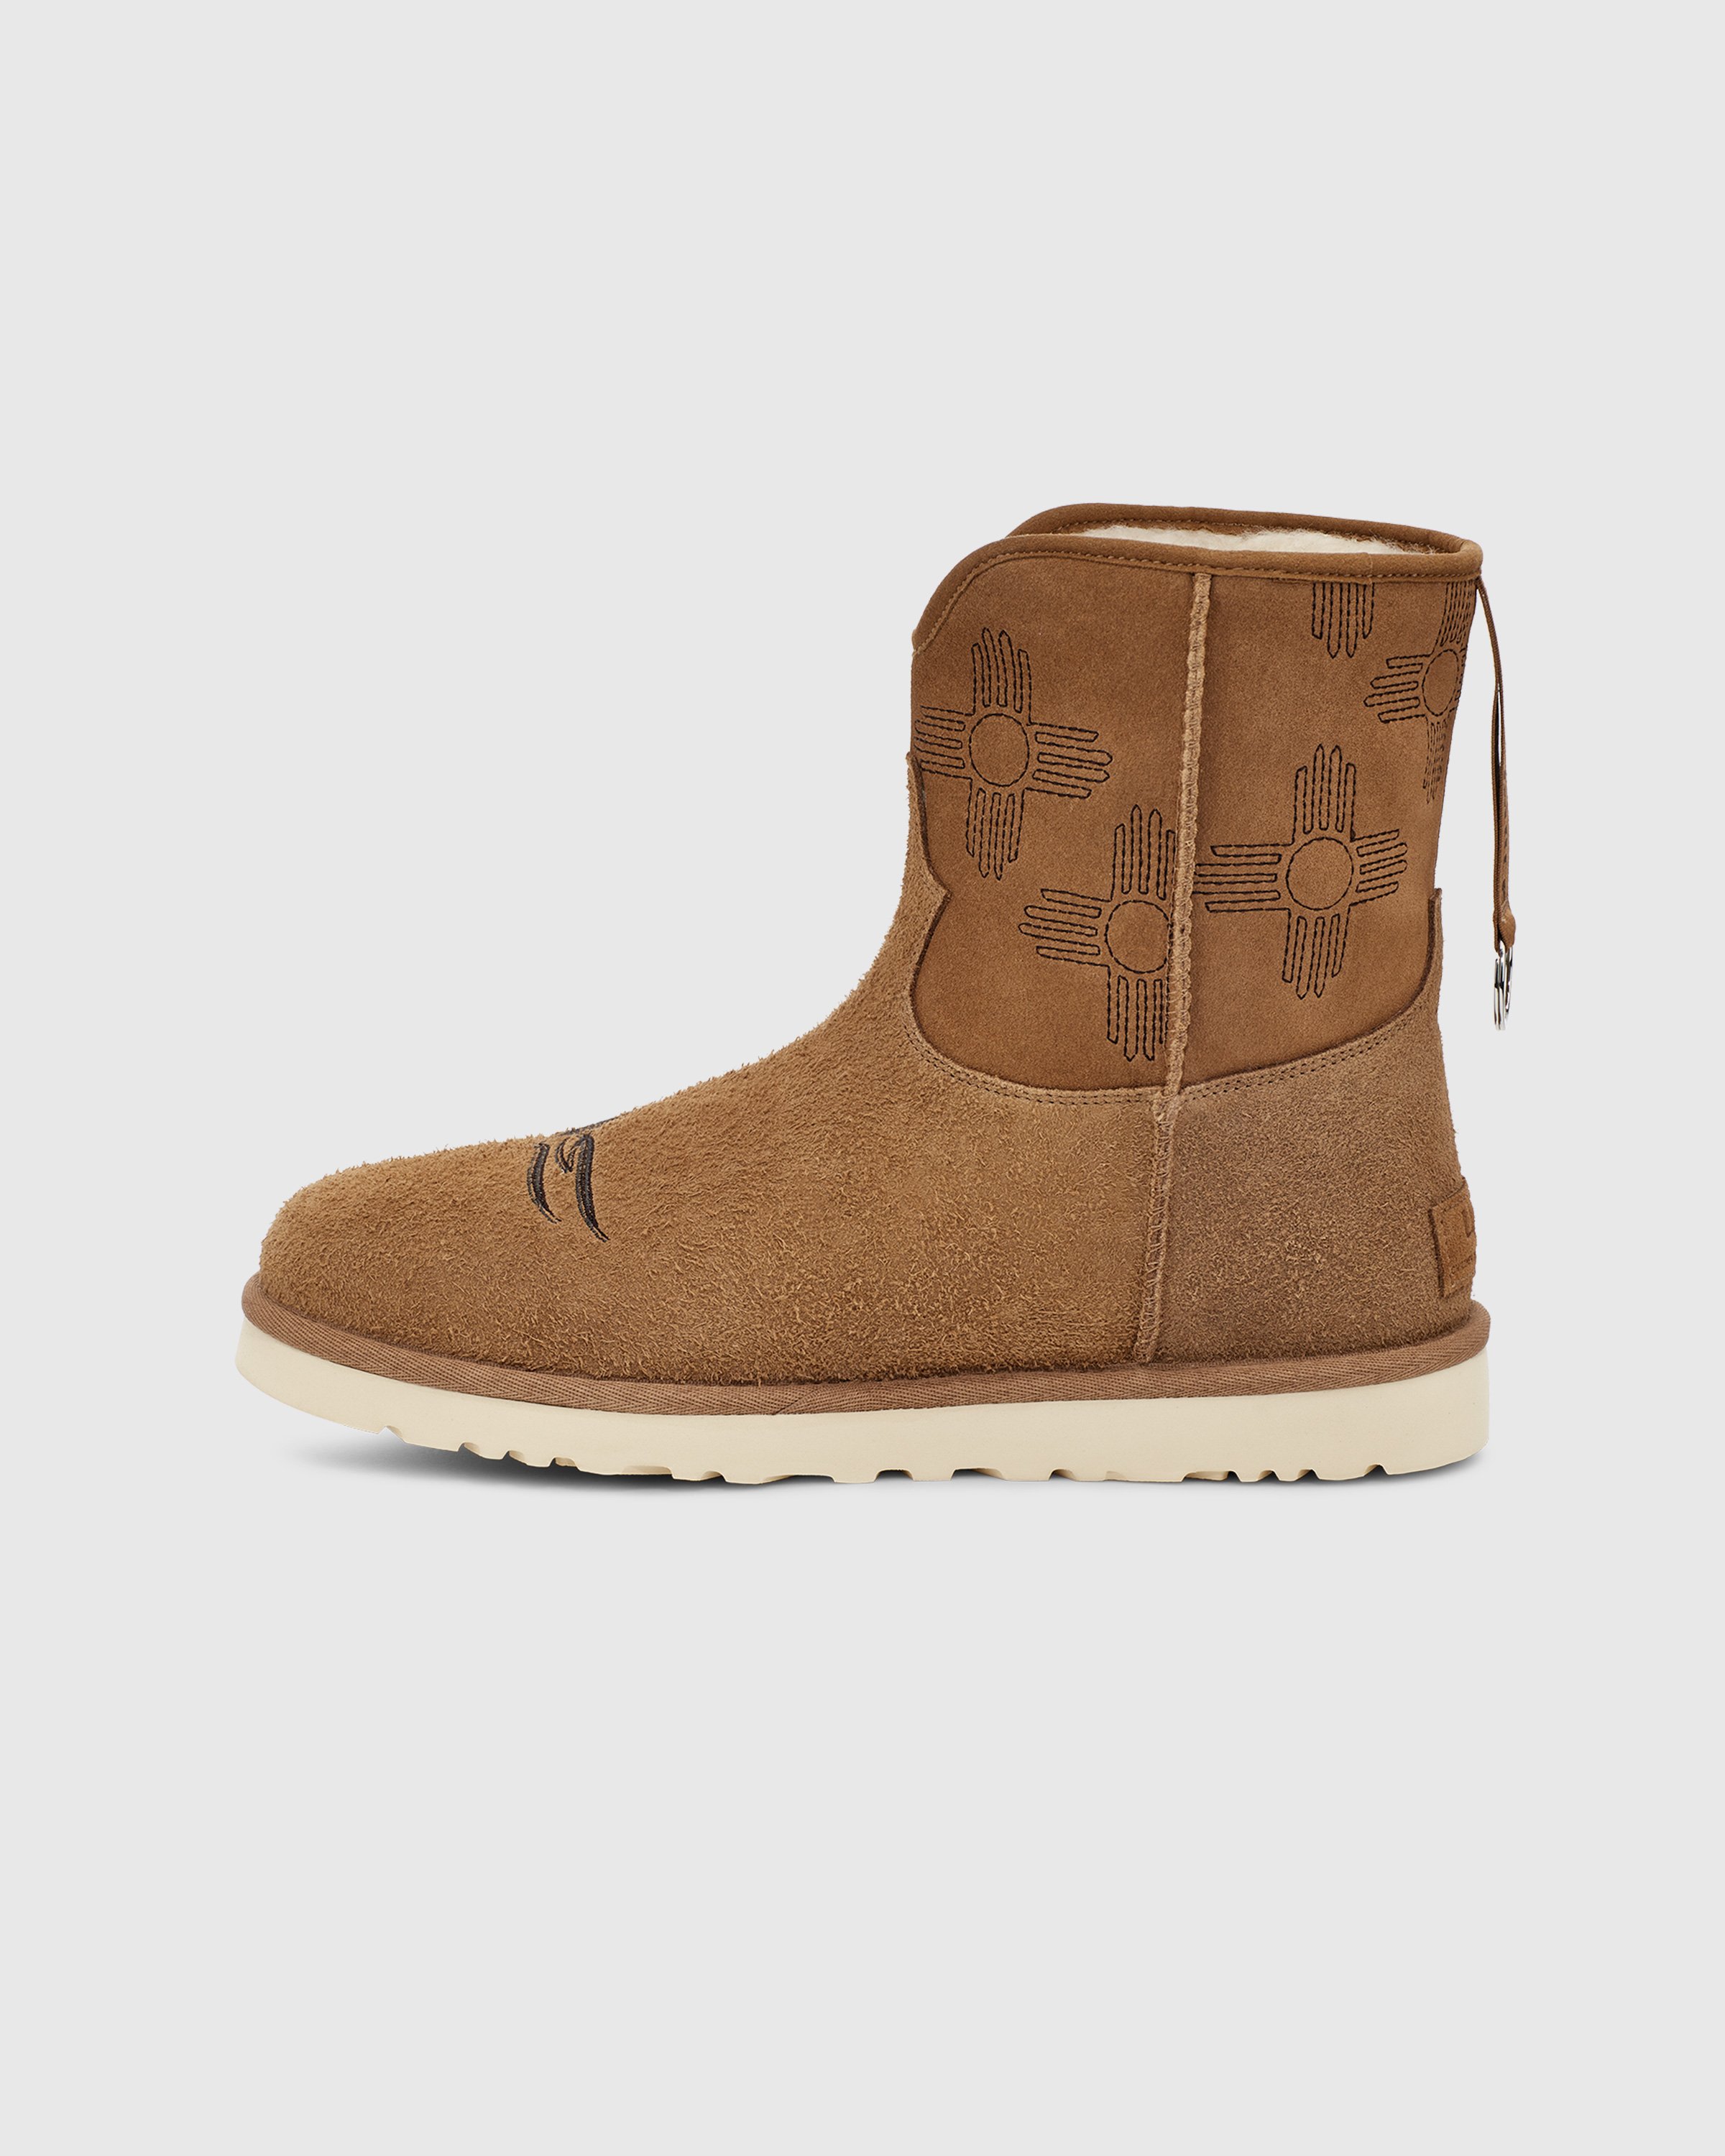 Ugg x Children of the Discordance - Classic Short Boot Brown - Footwear - Brown - Image 2